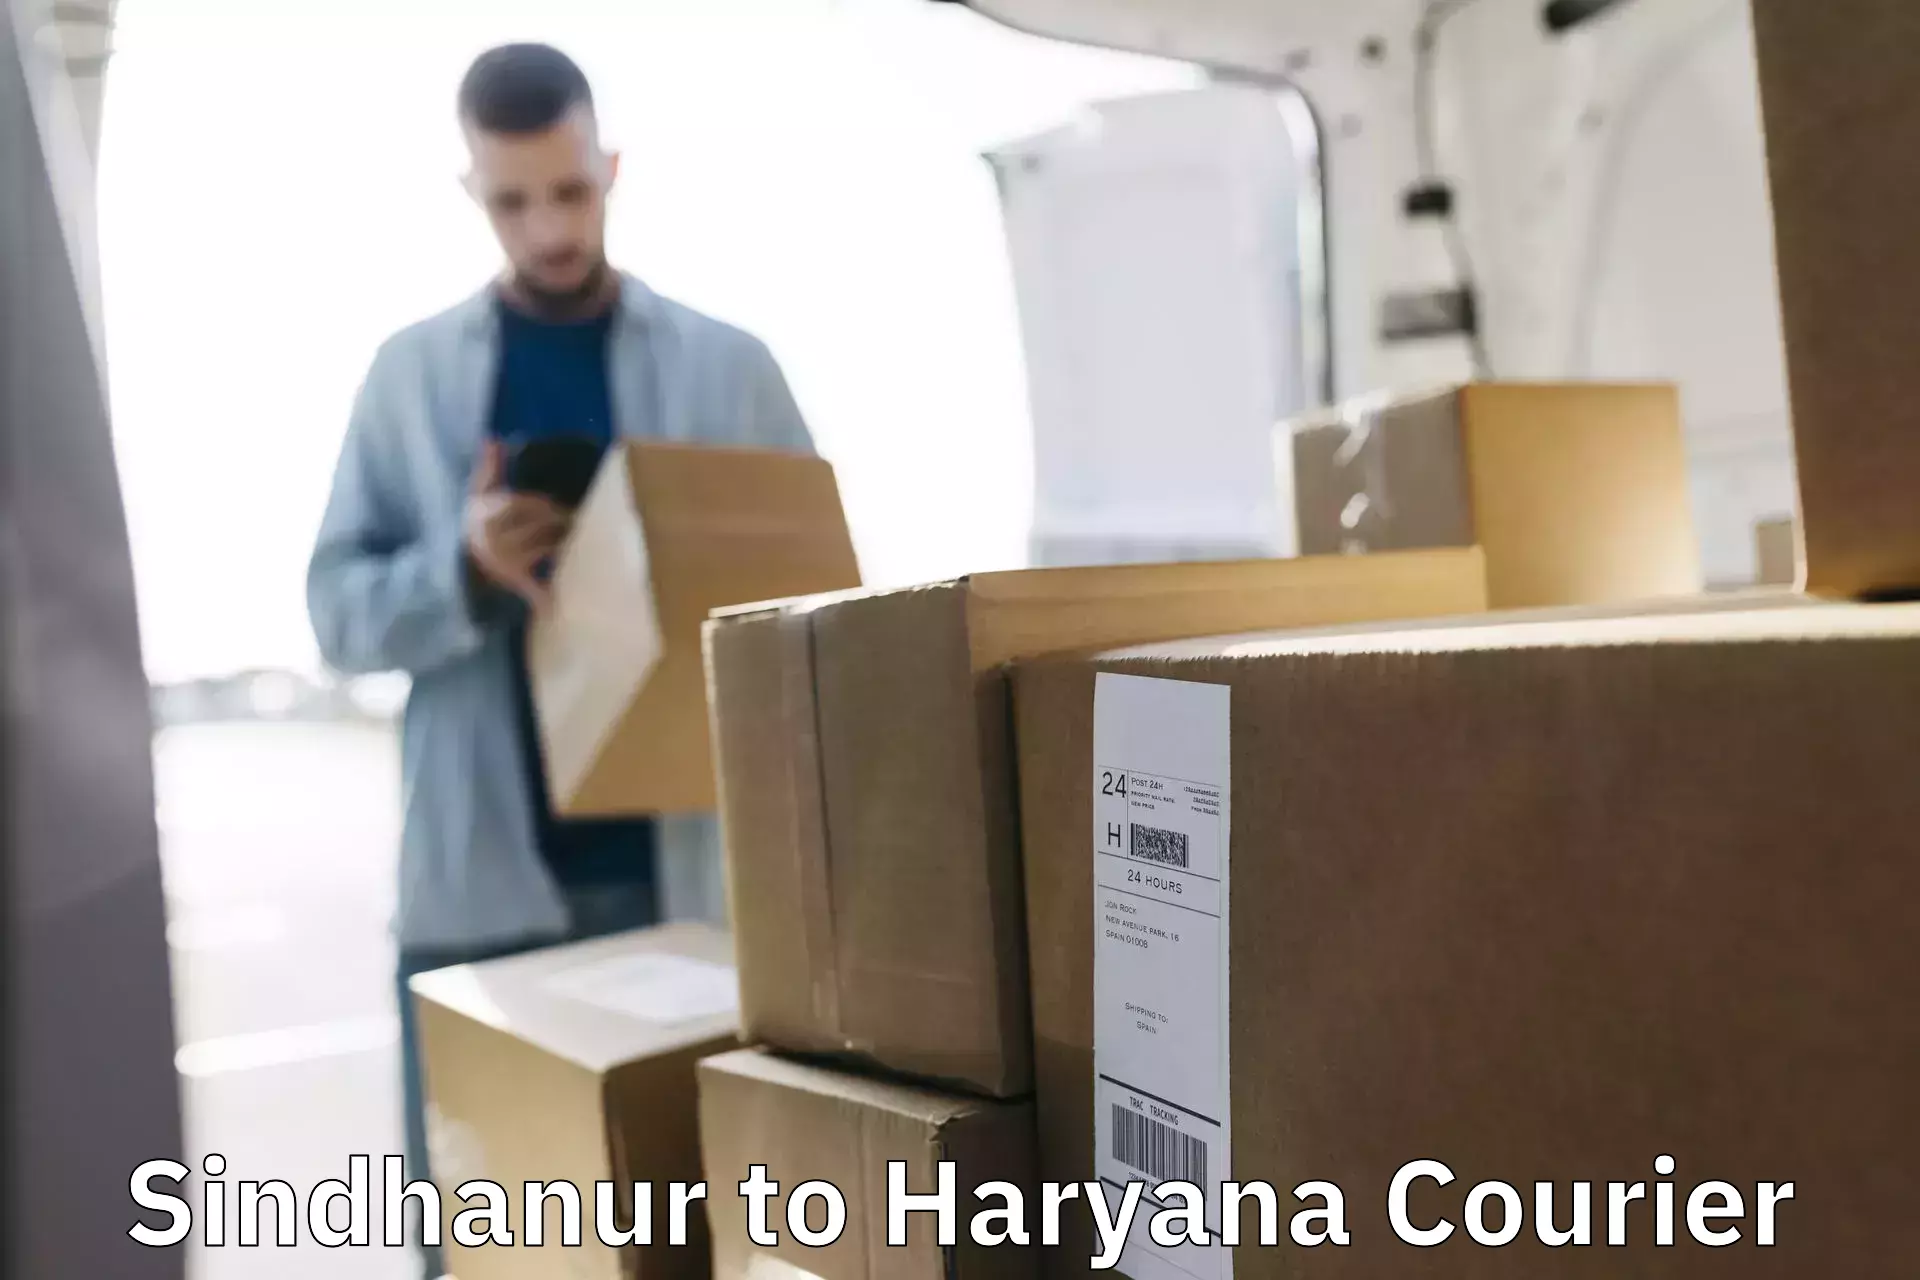 24-hour delivery options Sindhanur to NCR Haryana